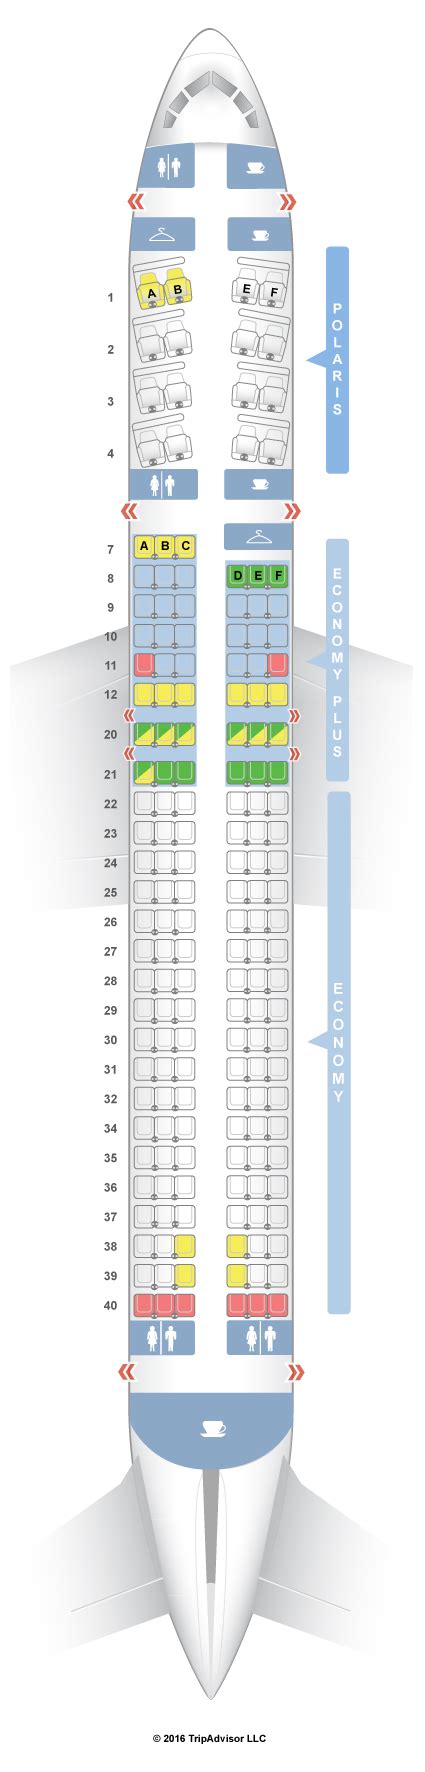 boeing 757 seat map united